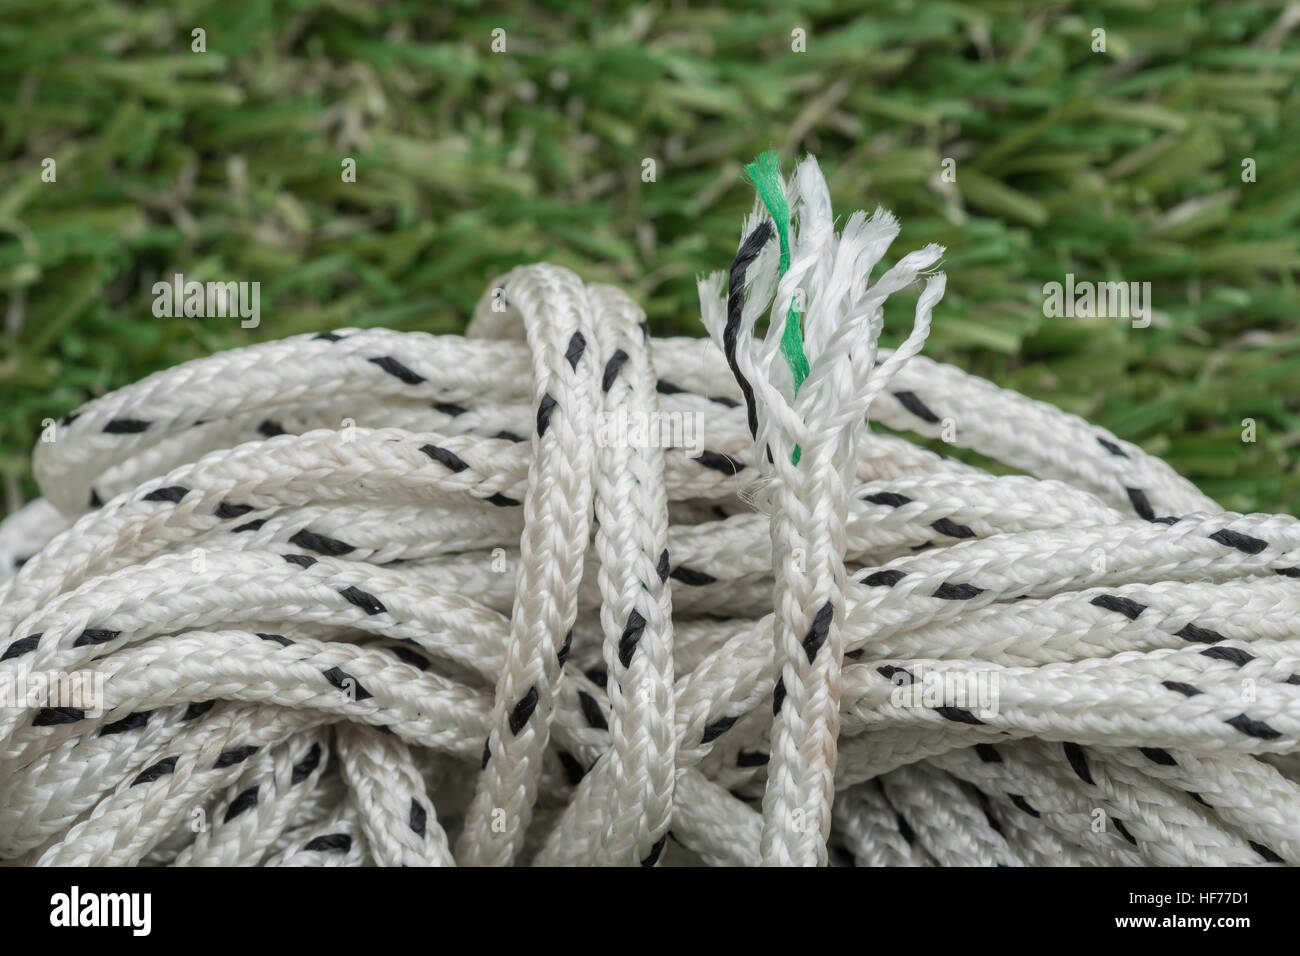 Hank of 'Paracord' - used for binding/tying in survival and outdoors  situations. Though not obvious this is 3-ply military grade Stock Photo -  Alamy